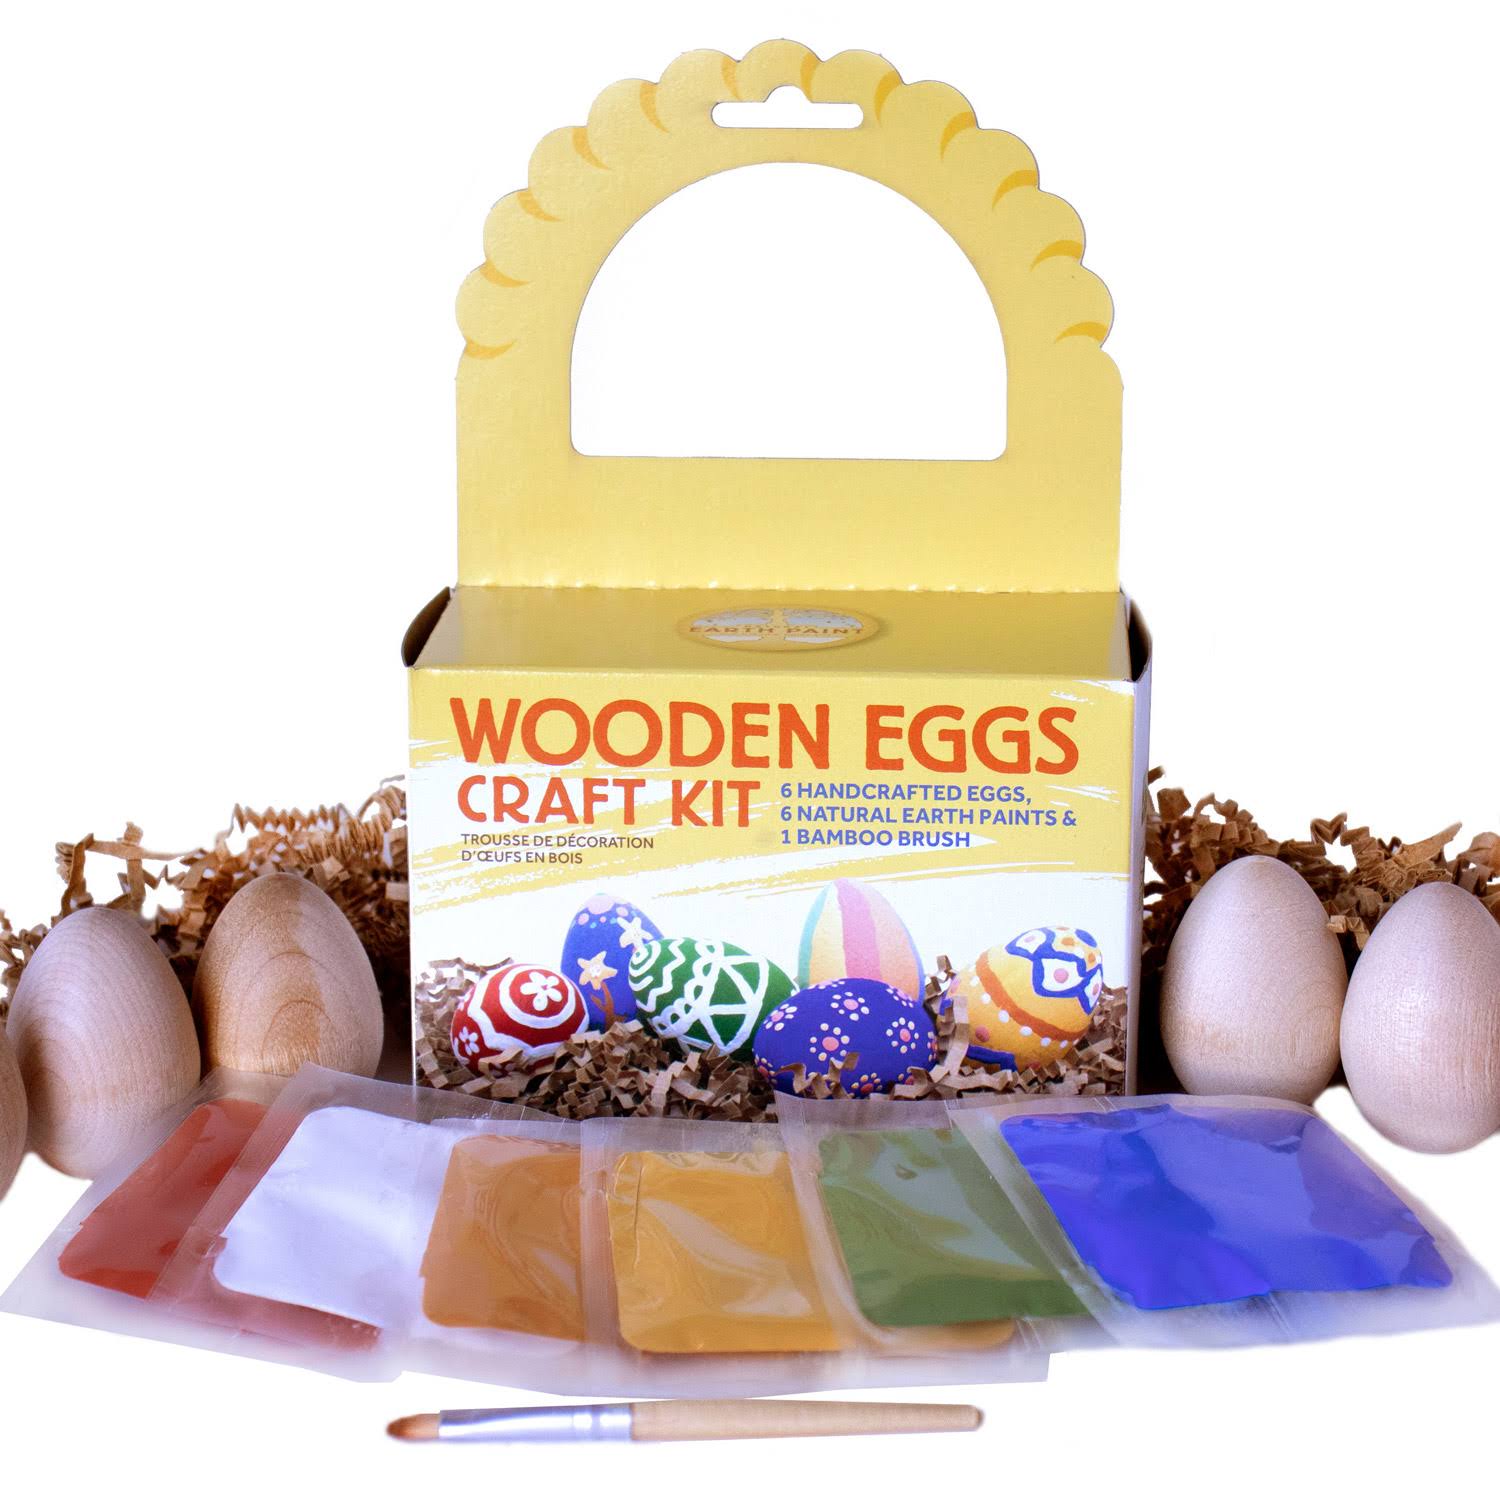 Natural Earth Paint - Wooden Eggs Craft Kit